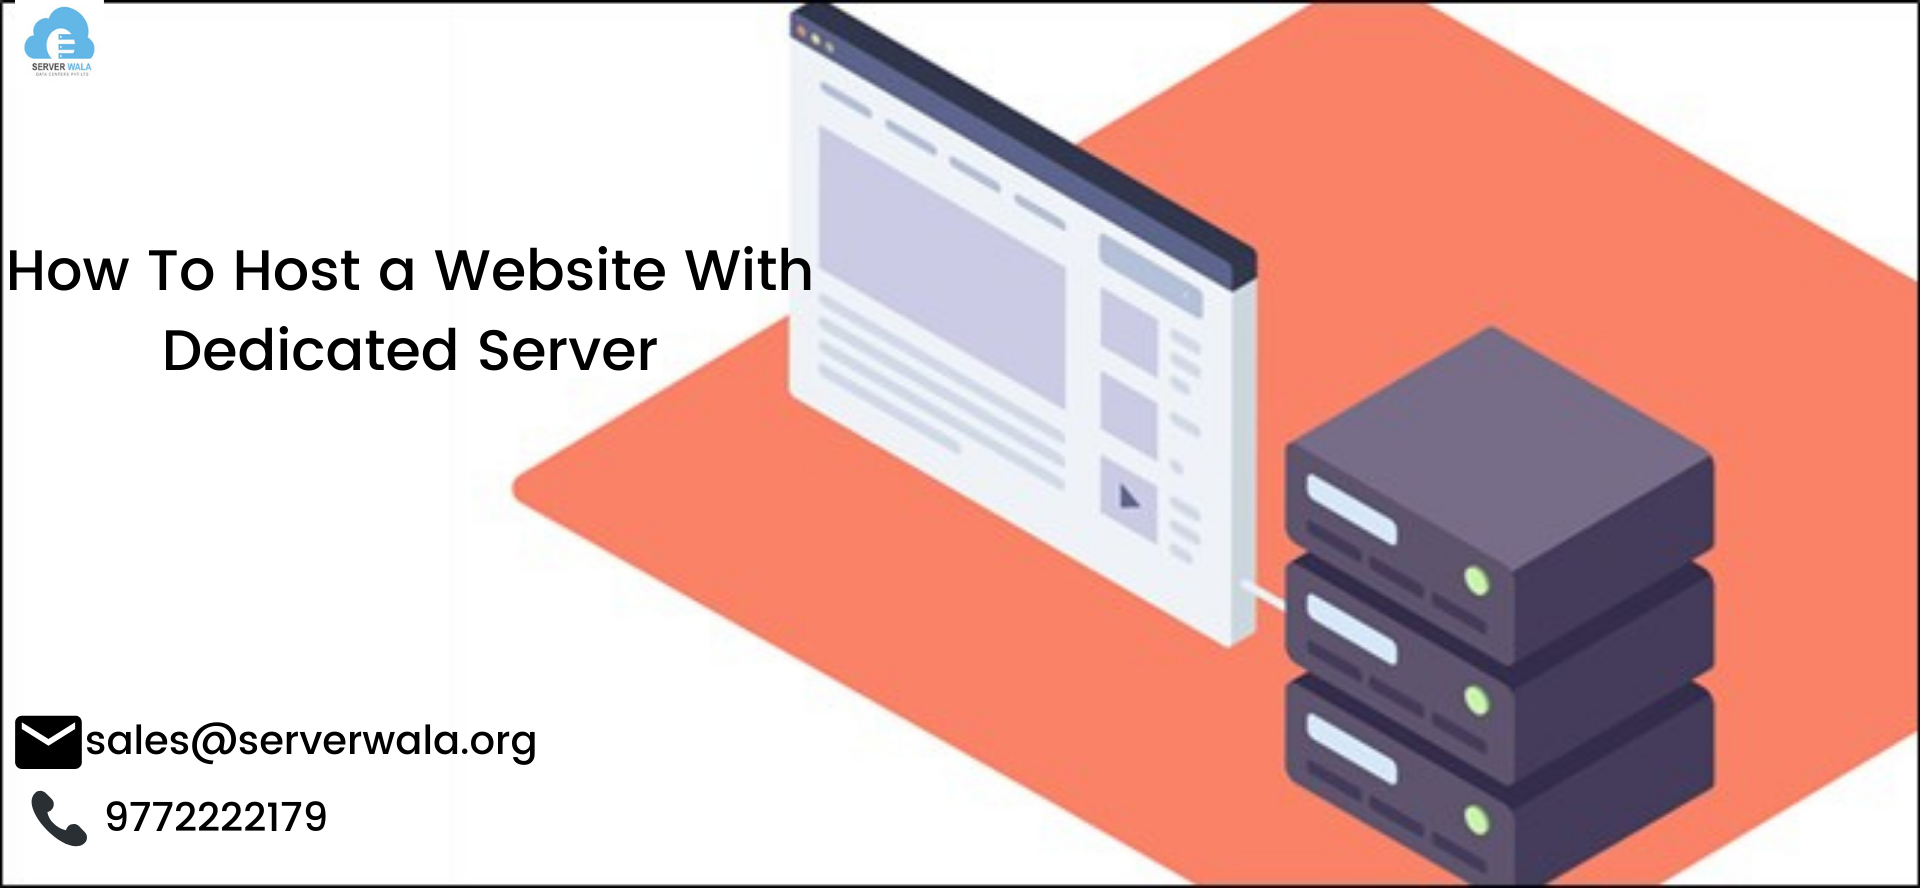 How To Host A Website On A Dedicated Server?